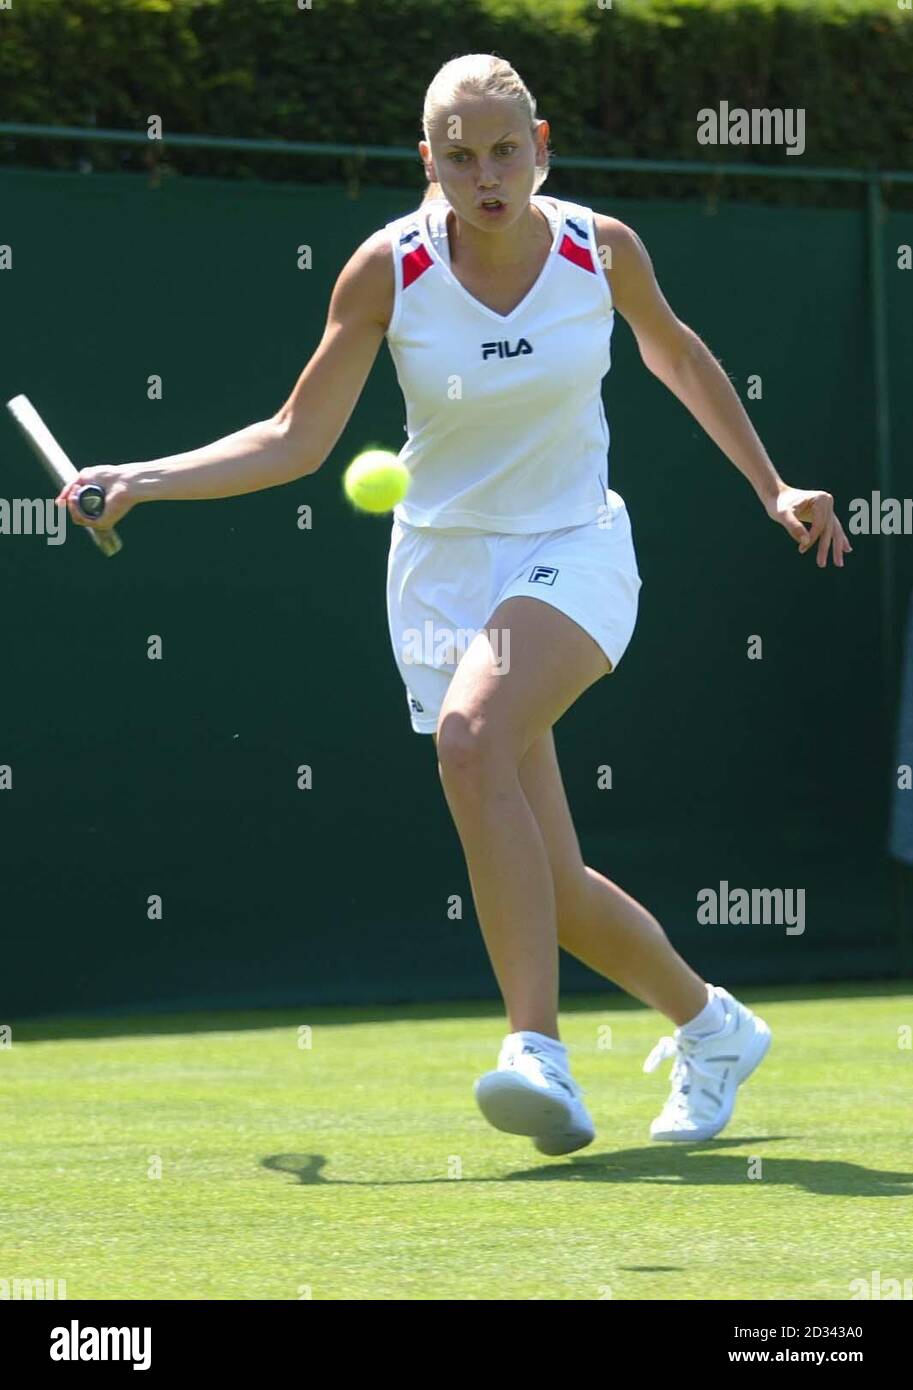 EDITORIAL USE ONLY, NO MOBILE PHONE USAGE. Jelena Dokic of Serbia Montenegro in action against Britain's Elena Baltacha at the All England Lawn Tennis Championships in Wimbledon. Stock Photo